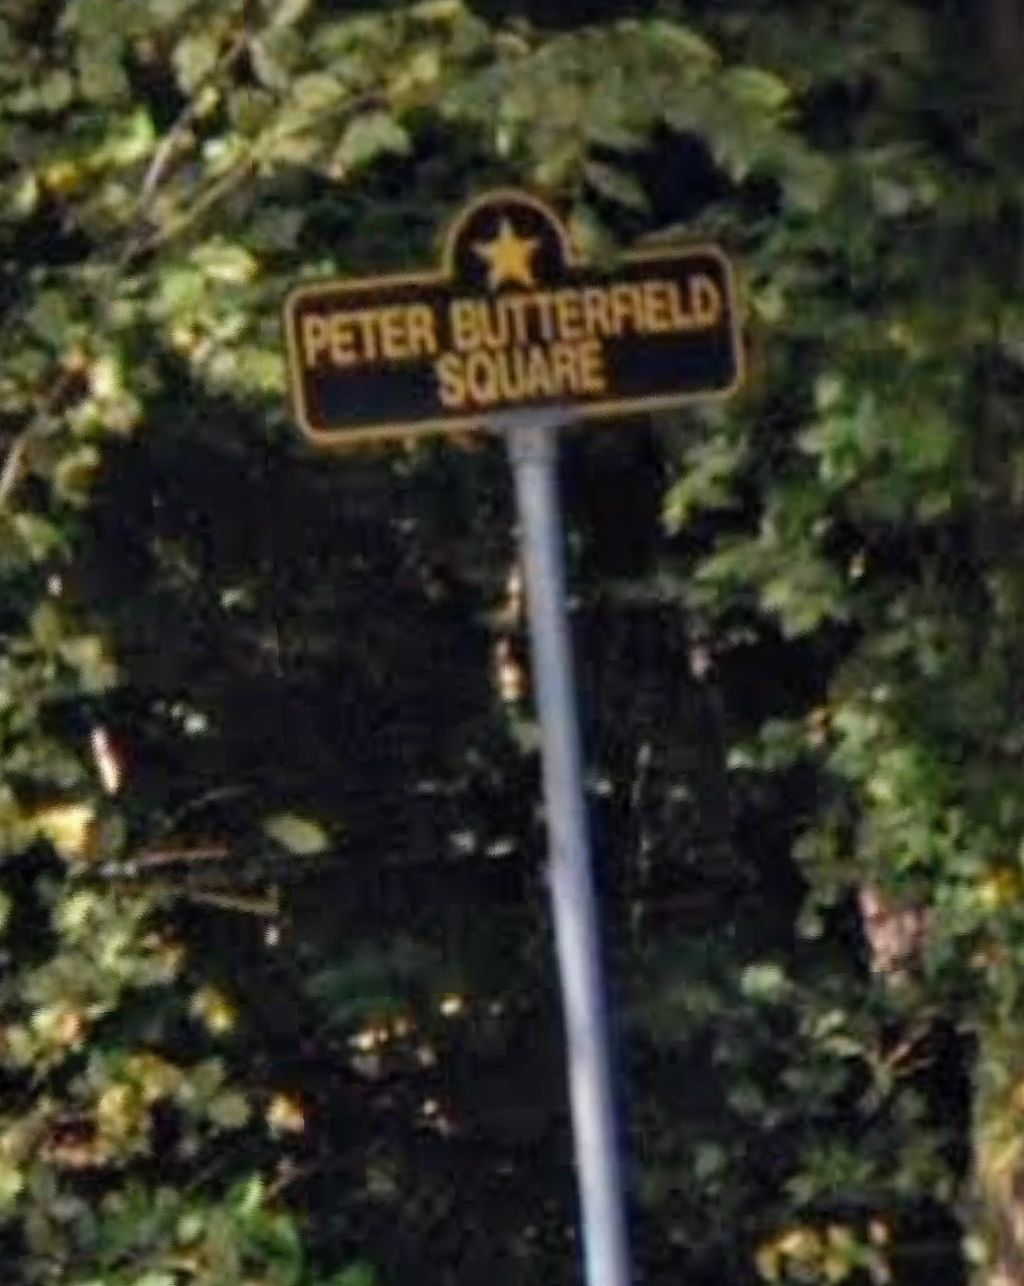 Peter Butterfield square